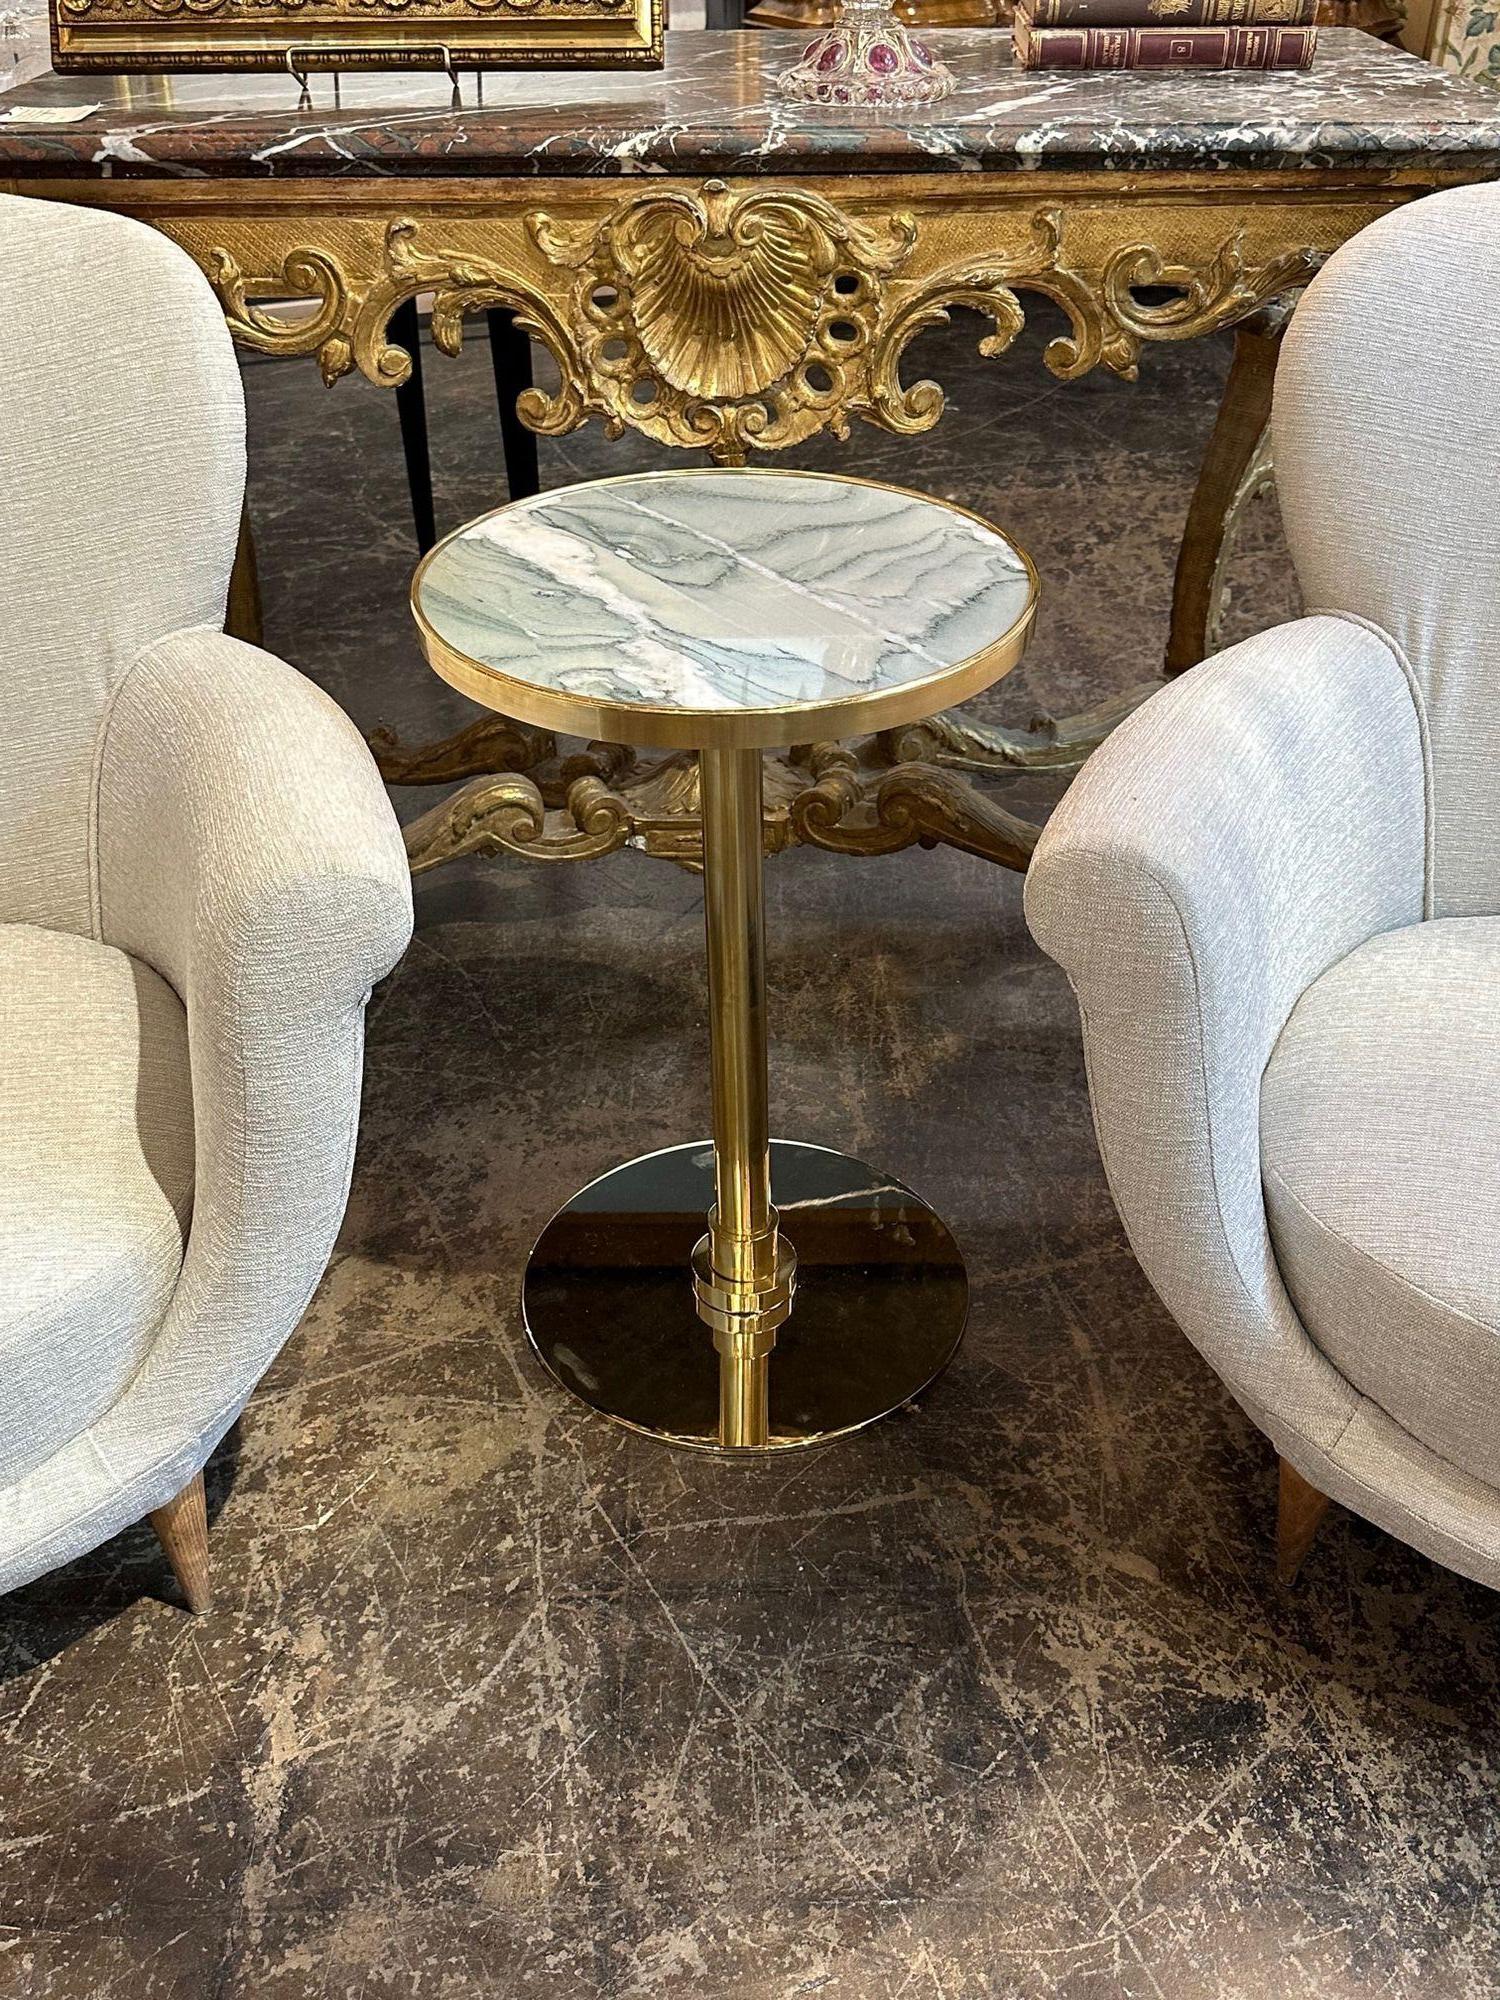 Vintage Italian polished brass and onyx side table. Circa 2000. Perfect for today's transitional designs!